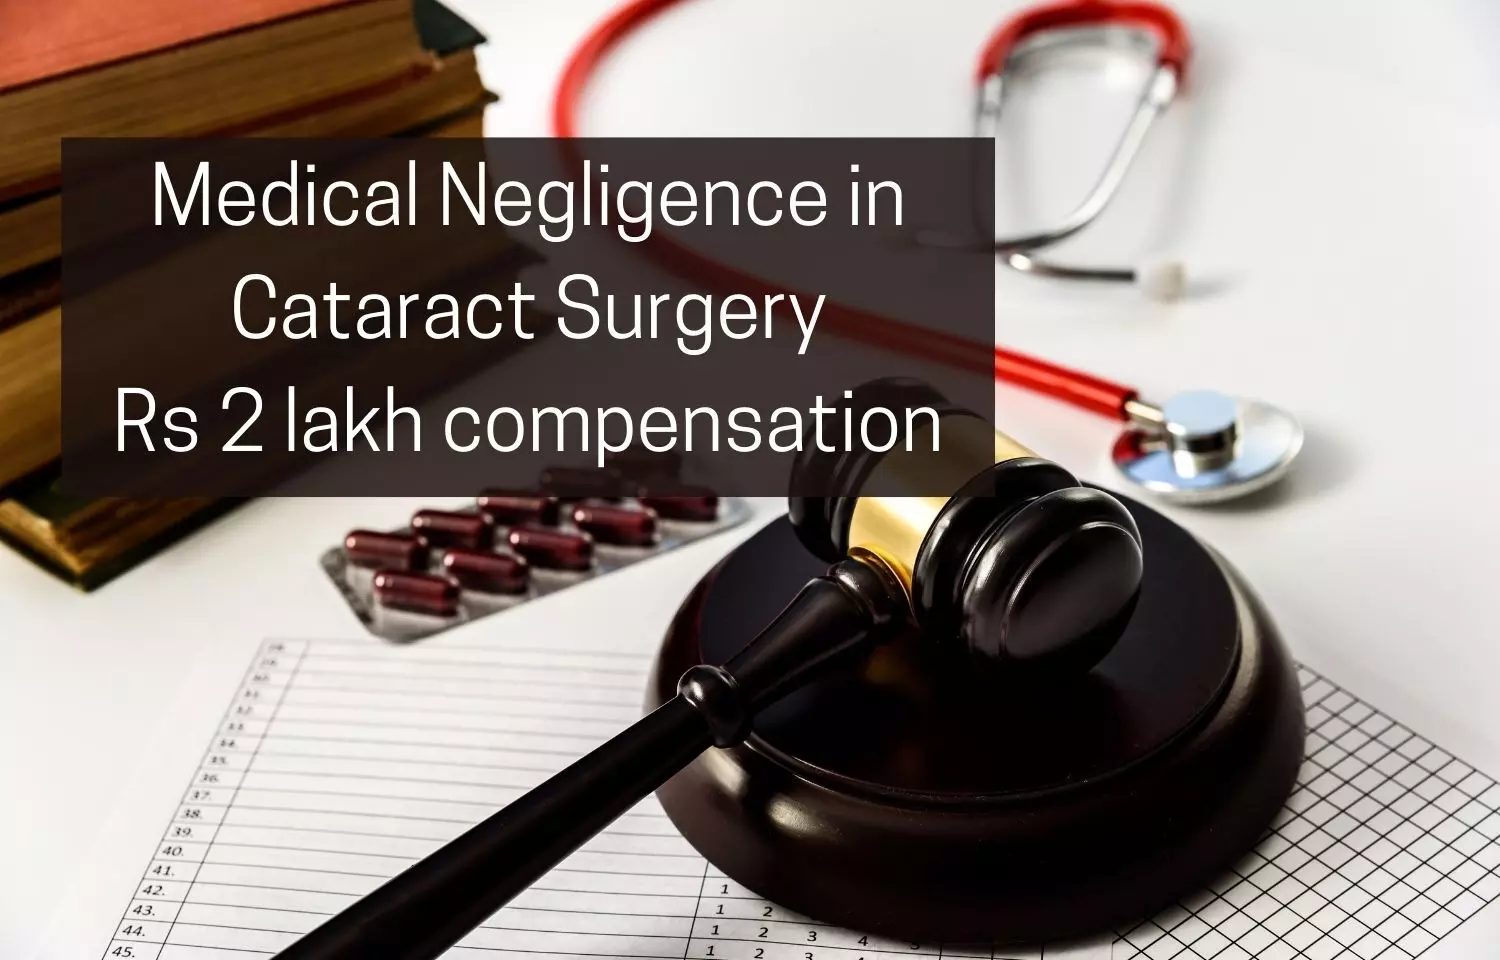 NCDRC holds Ophthalmologist negligent during cataract surgery, slaps Rs 2 lakh compensation